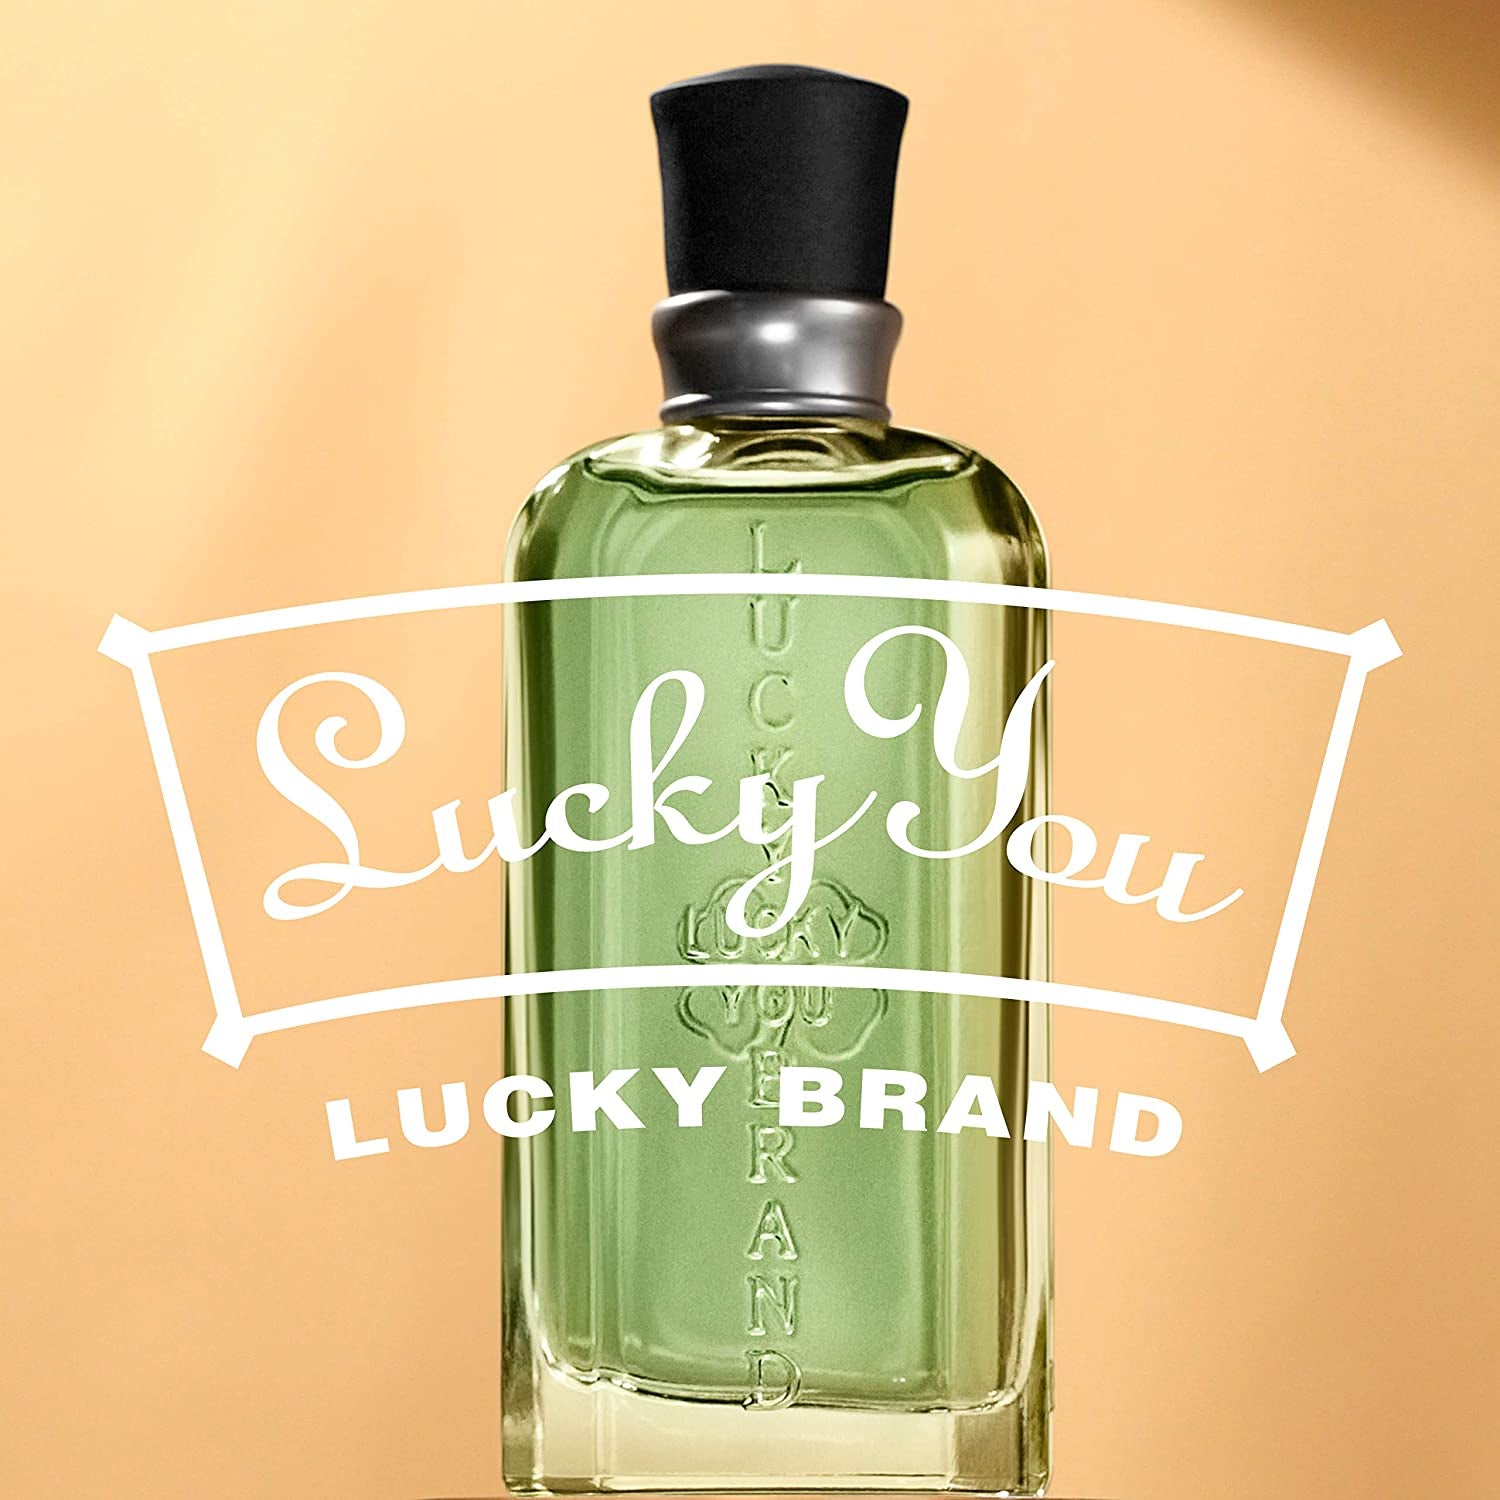 Lucky You Men's Cologne Fragrance Spray, Day or Night Casual Scent with Bamboo Stem Fragrance Notes, 3.4 Fl Oz